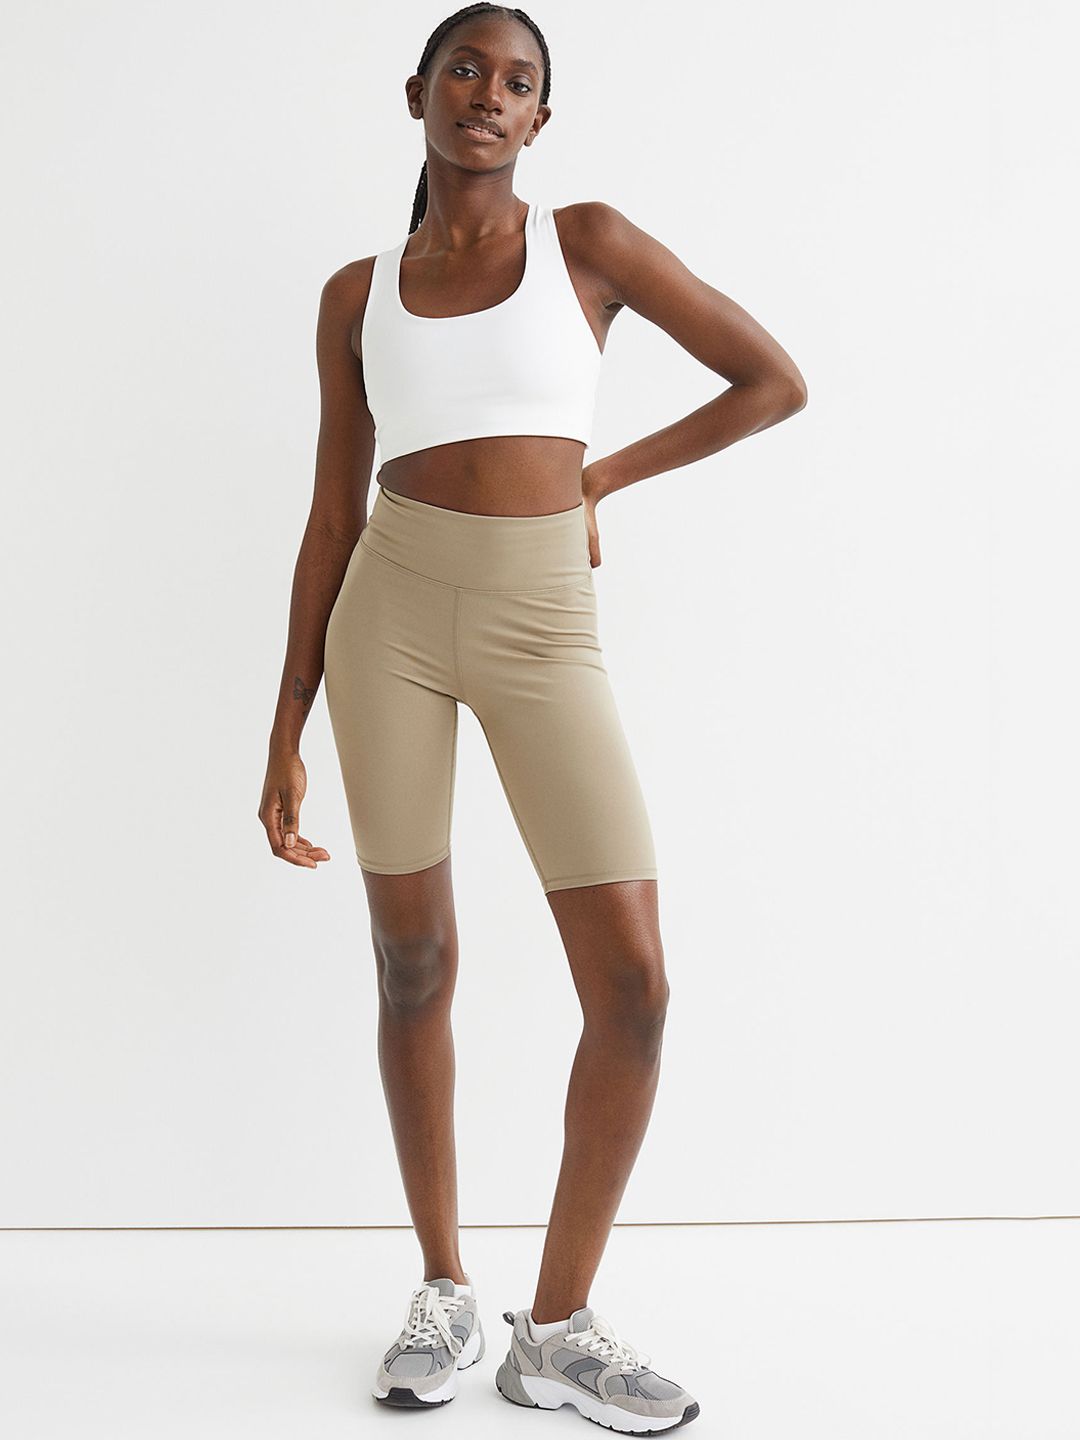 H&M Women Beige Sports Cycling Shorts Price in India